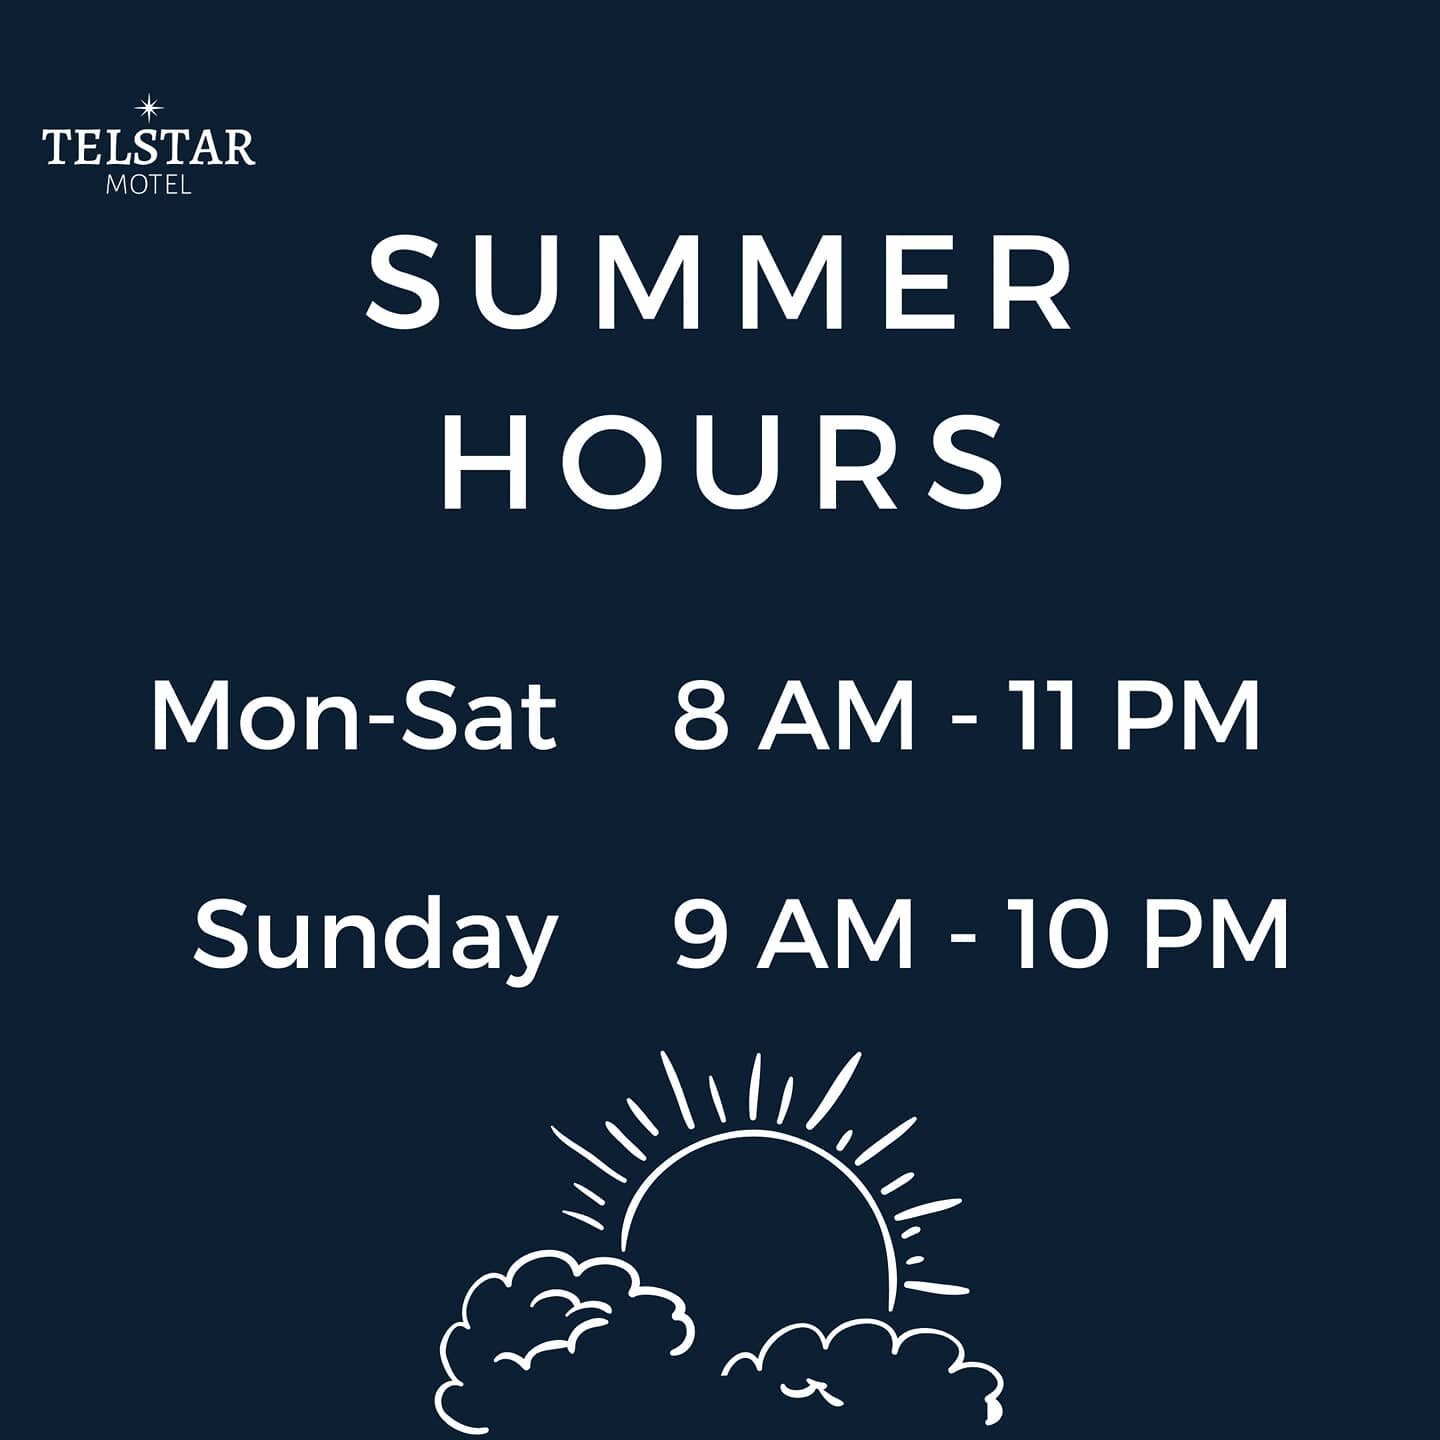 We are back to regular summer hours! Here's hoping we can safely lift some travel restrictions before the season is over 🤞🤞